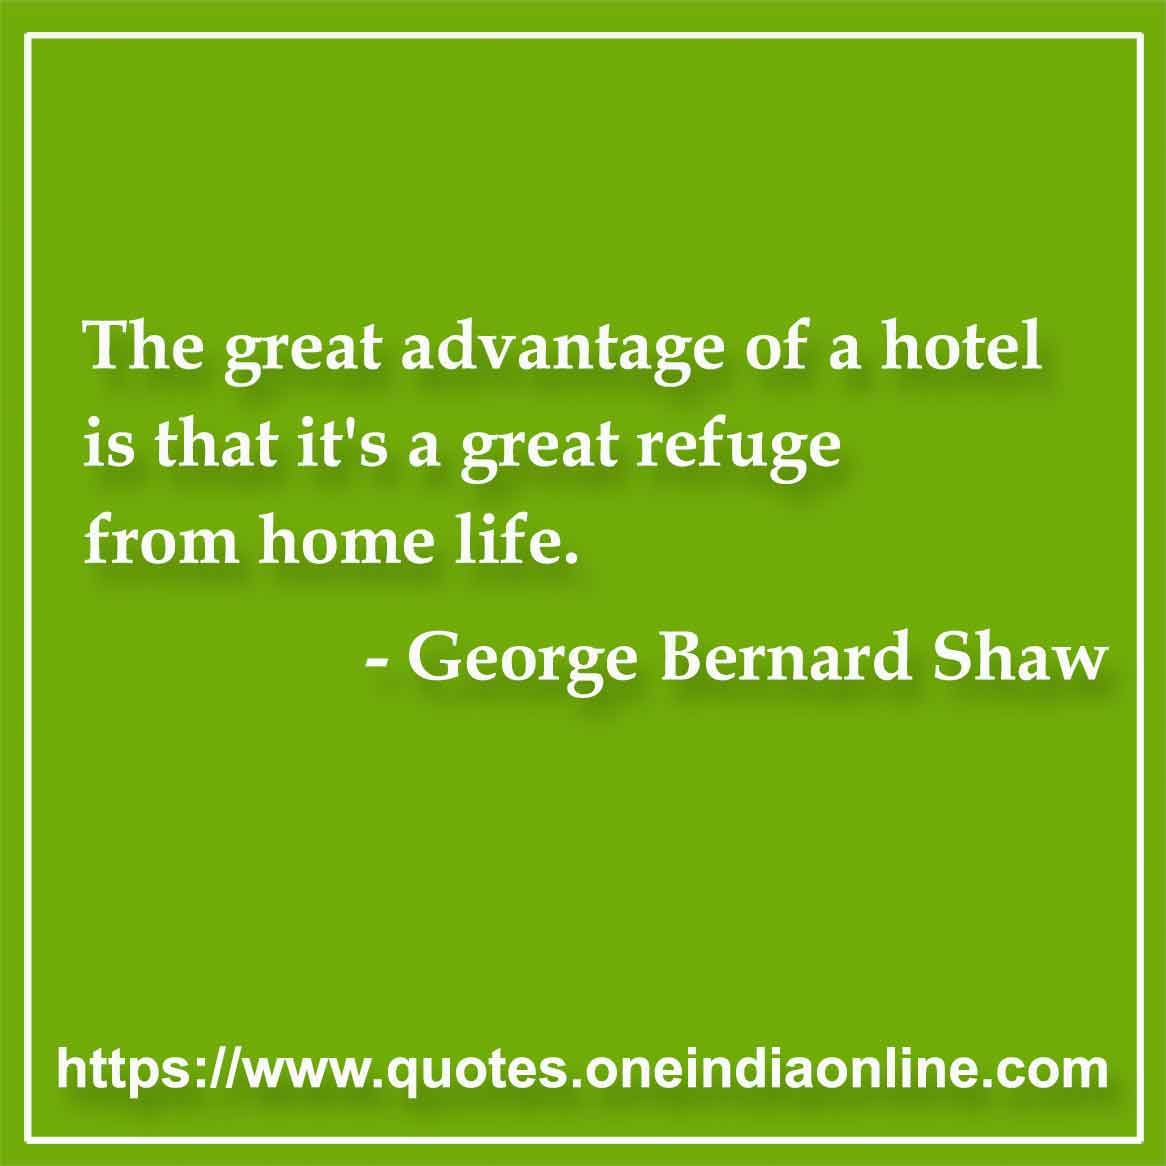 The great advantage of a hotel is that it's a great refuge from home life. 

- George Bernard Shaw